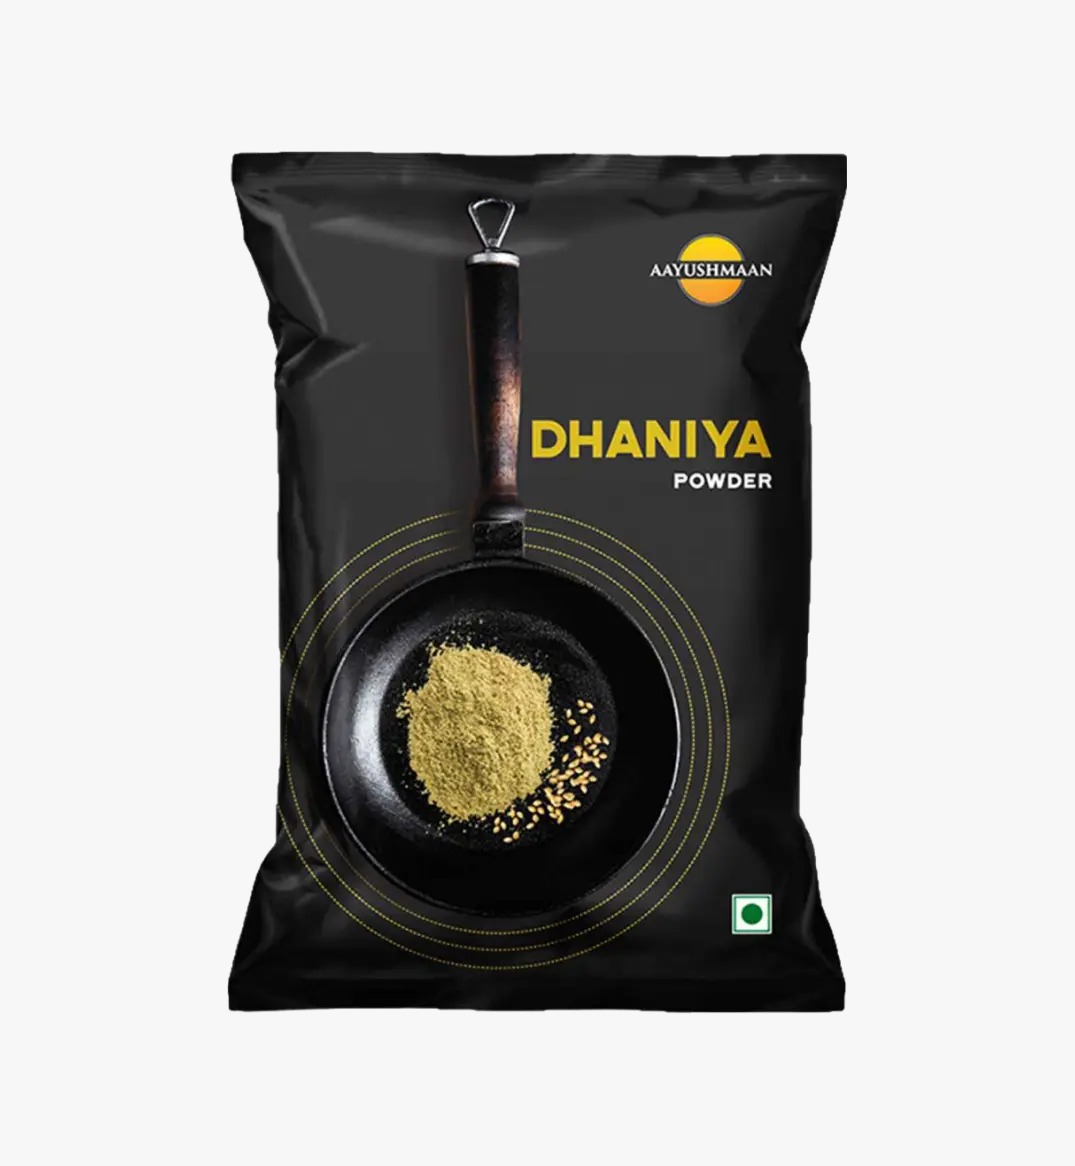 Aayushmaan Dhaniya Powder- a perfect blend of Indian spices